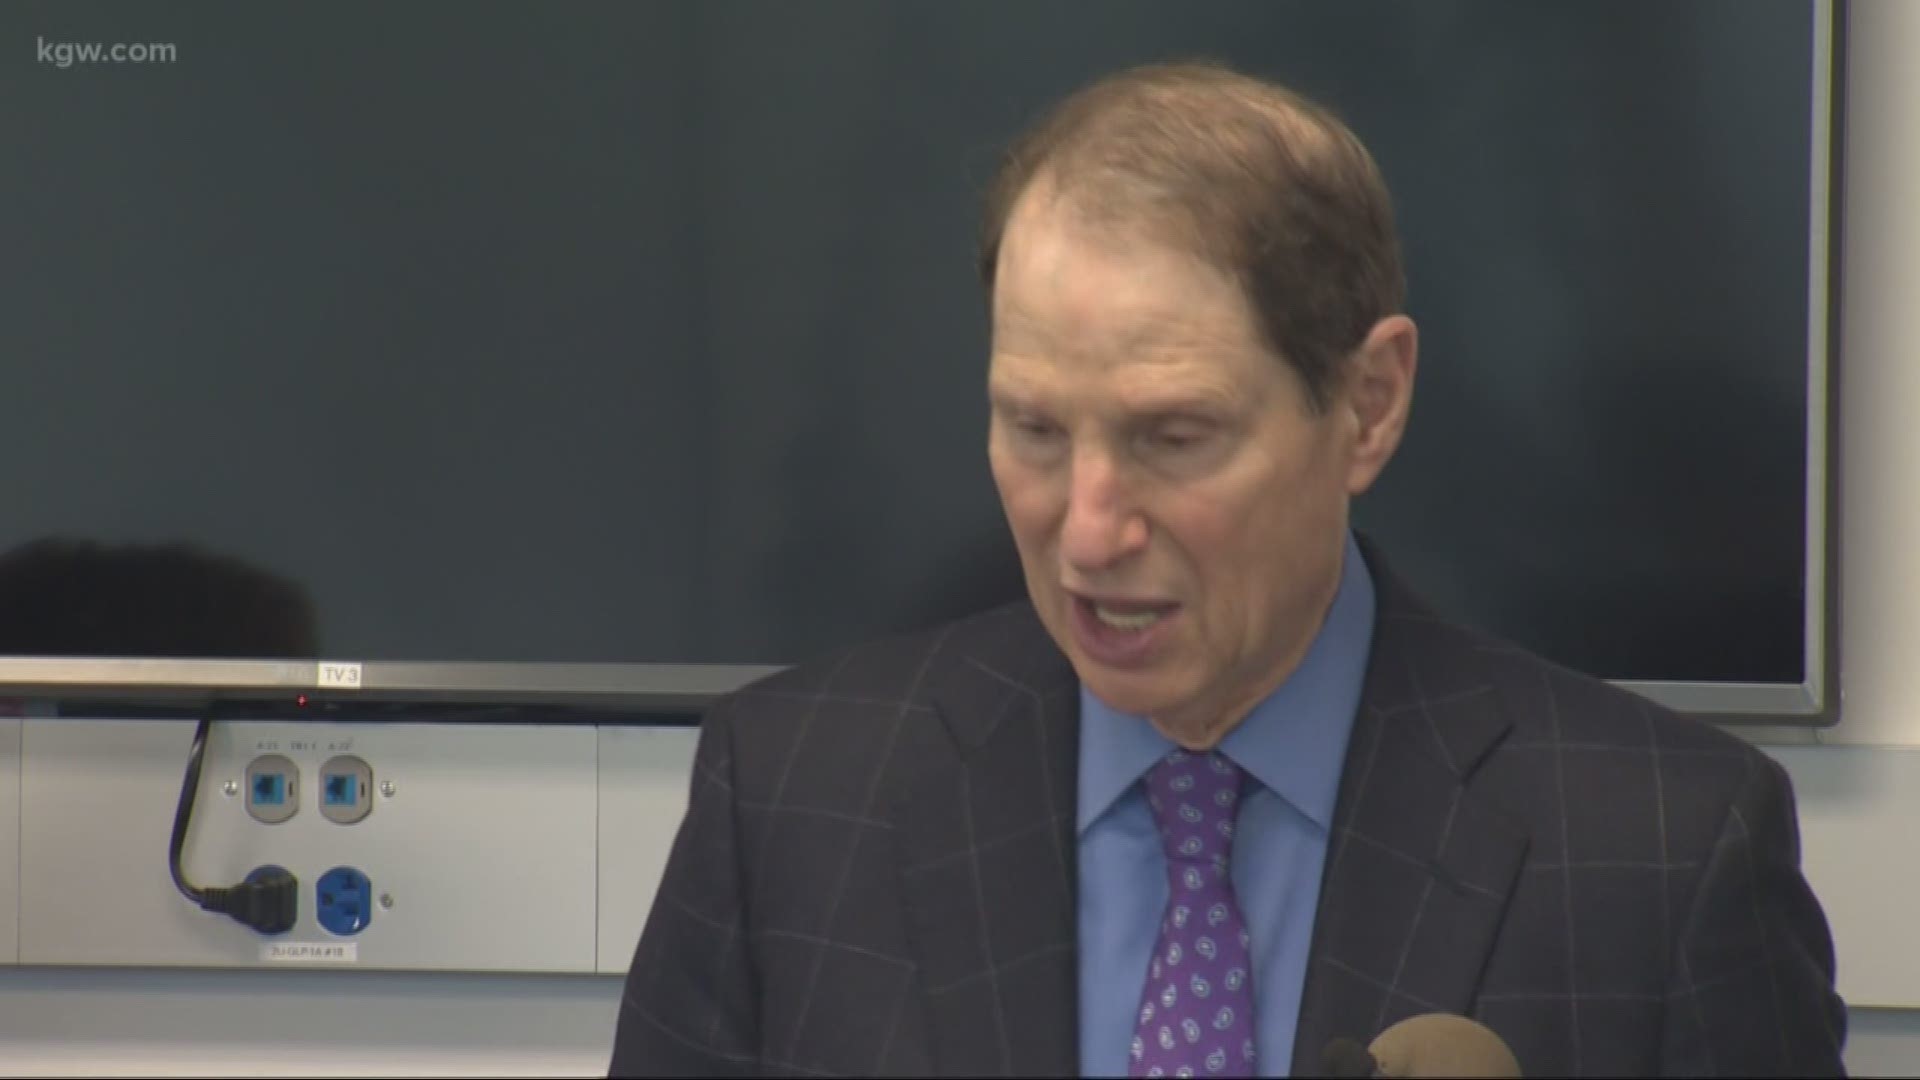 A death linked to vaping. After health officials announced the investigation, Sen. Ron Wyden says he will introduce a federal bill to curb e-cigarette use.